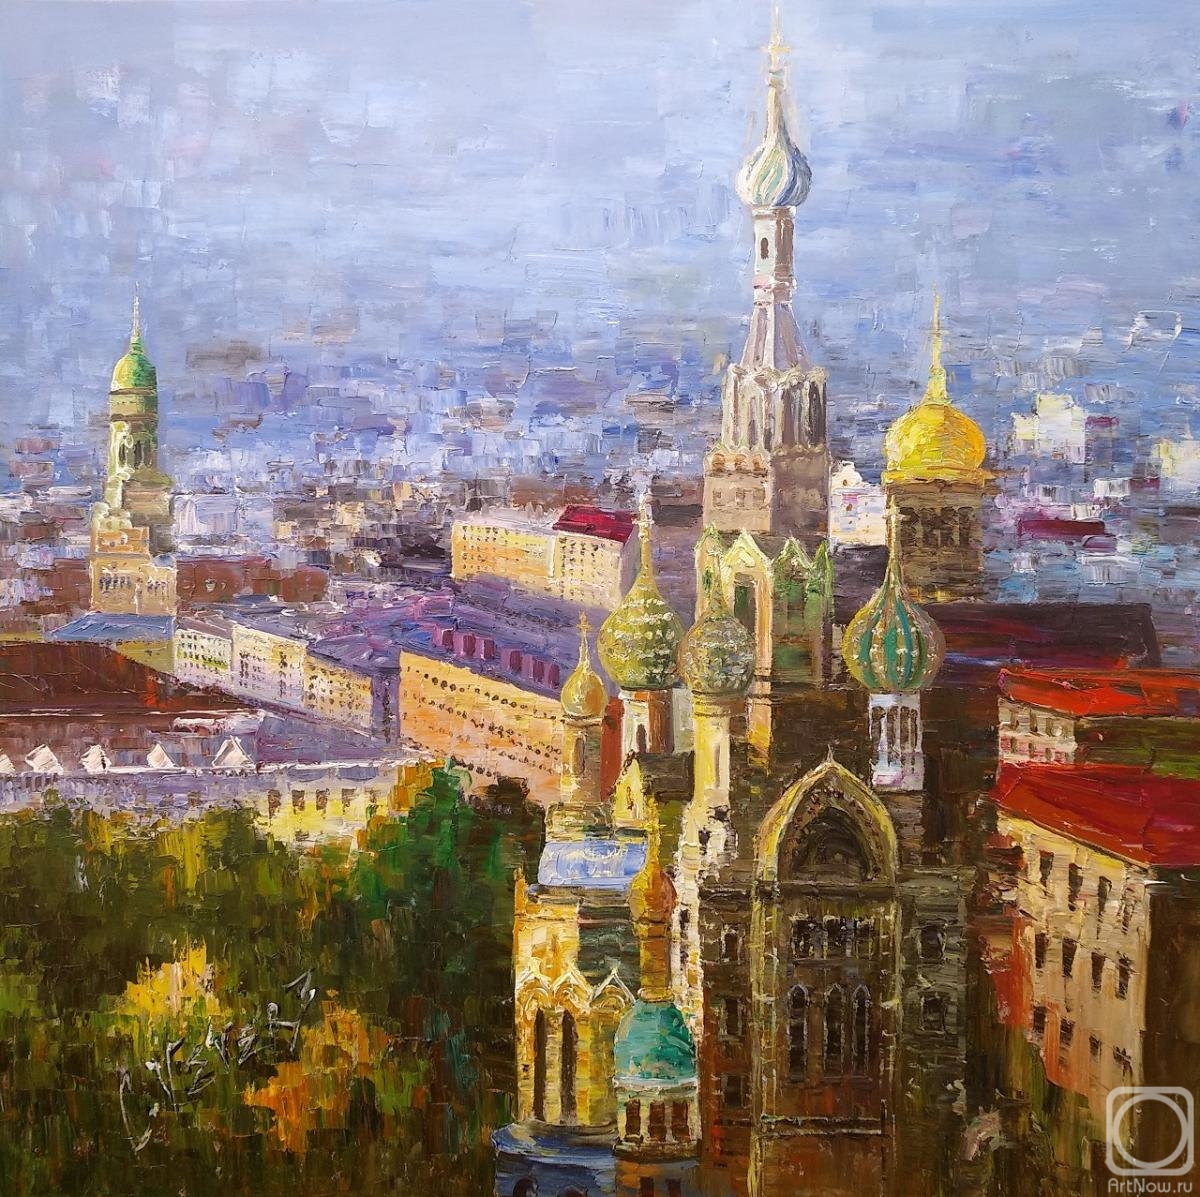 Vevers Christina. View of the Church of the Savior on Blood from a bird's flight